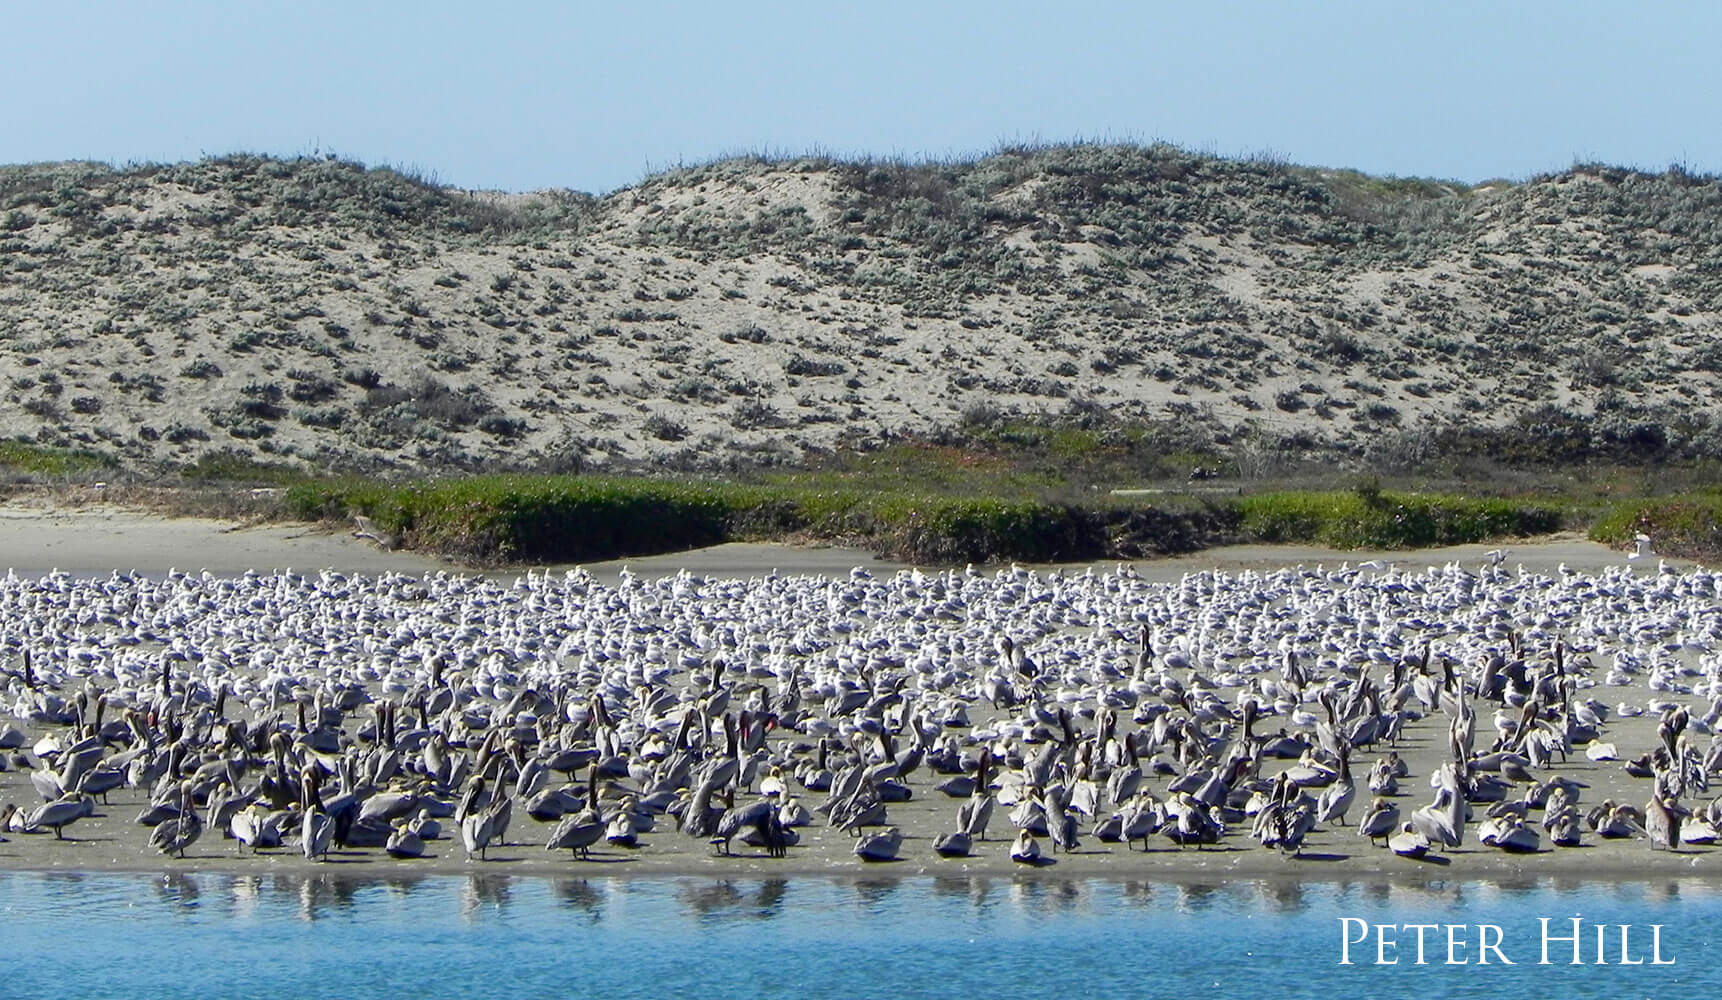 A hill behind a beach full of seagulls and pelicans.